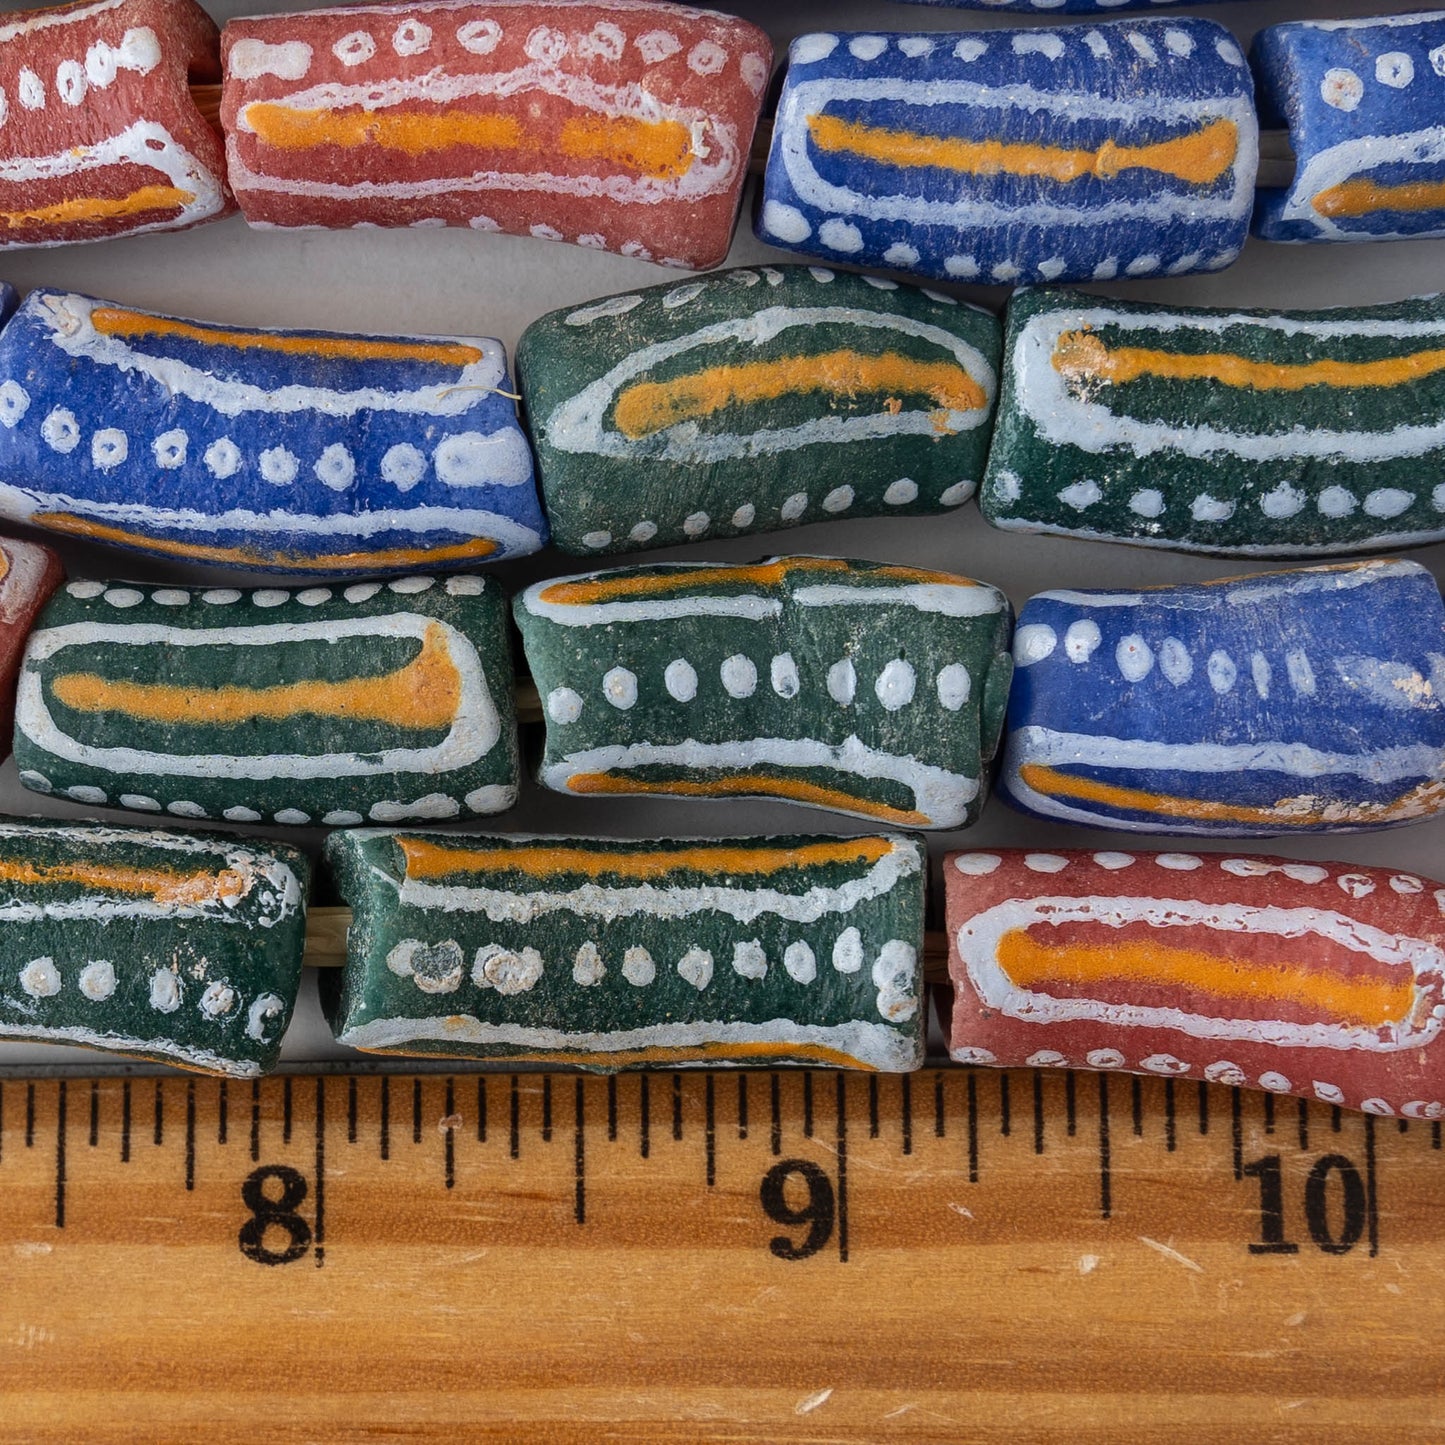 Painted Tube Beads From Ghana Africa - Designed - 12 Beads